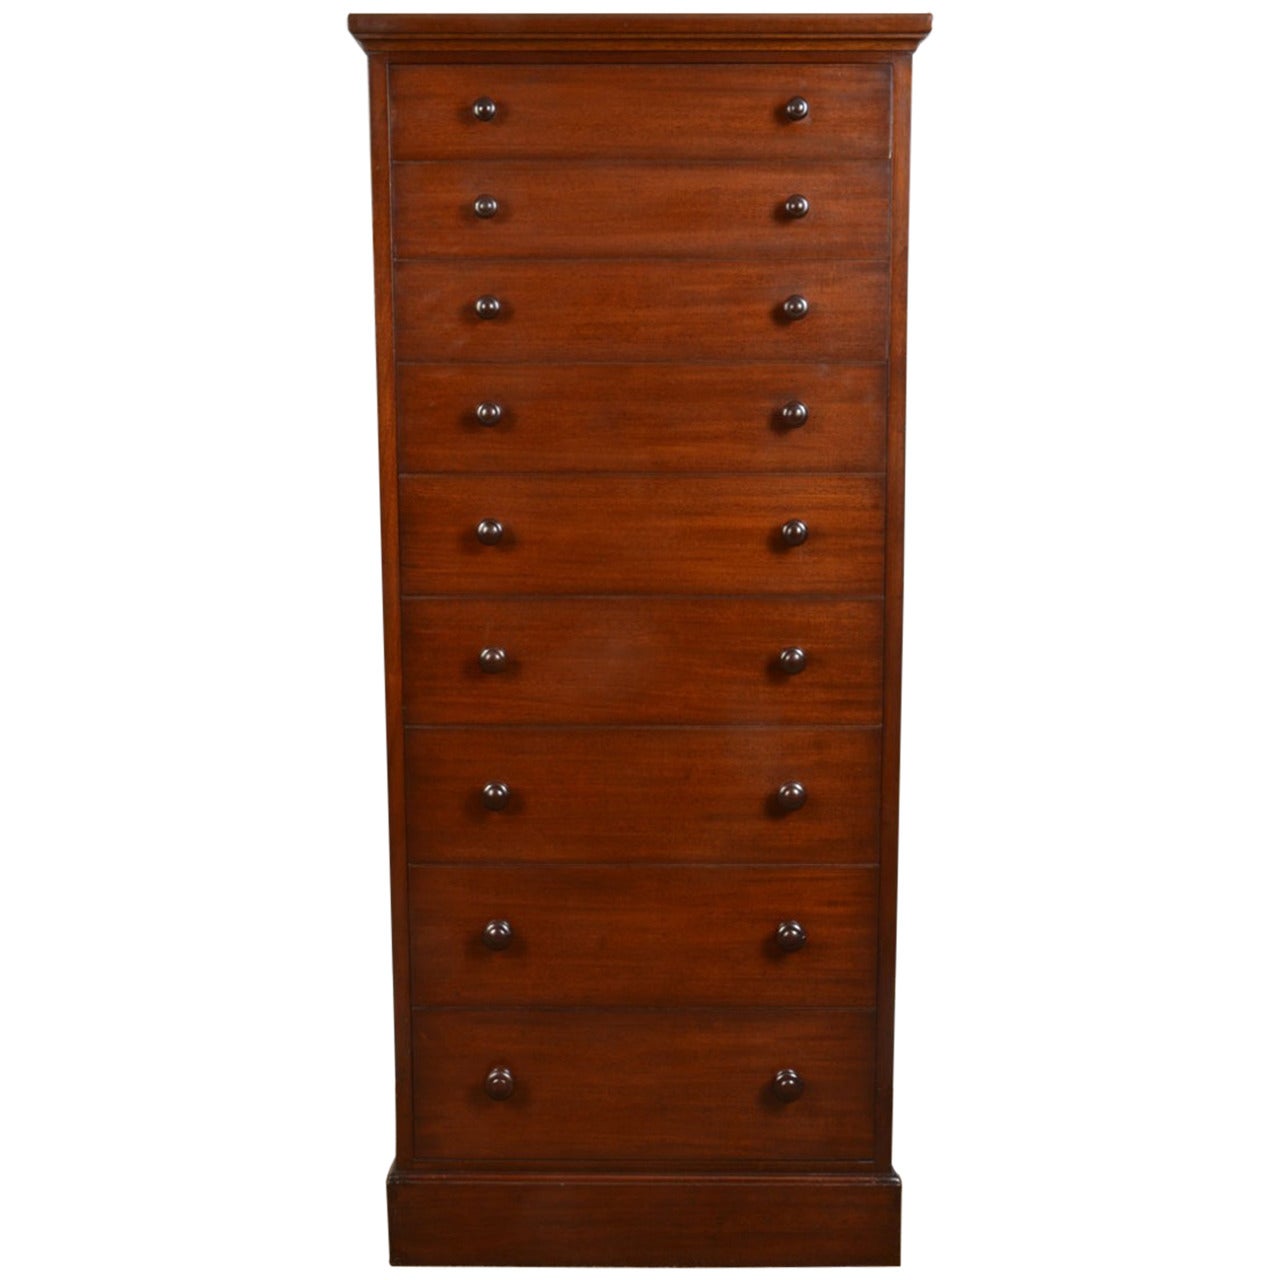 Mahogany Tall Chest of Drawers